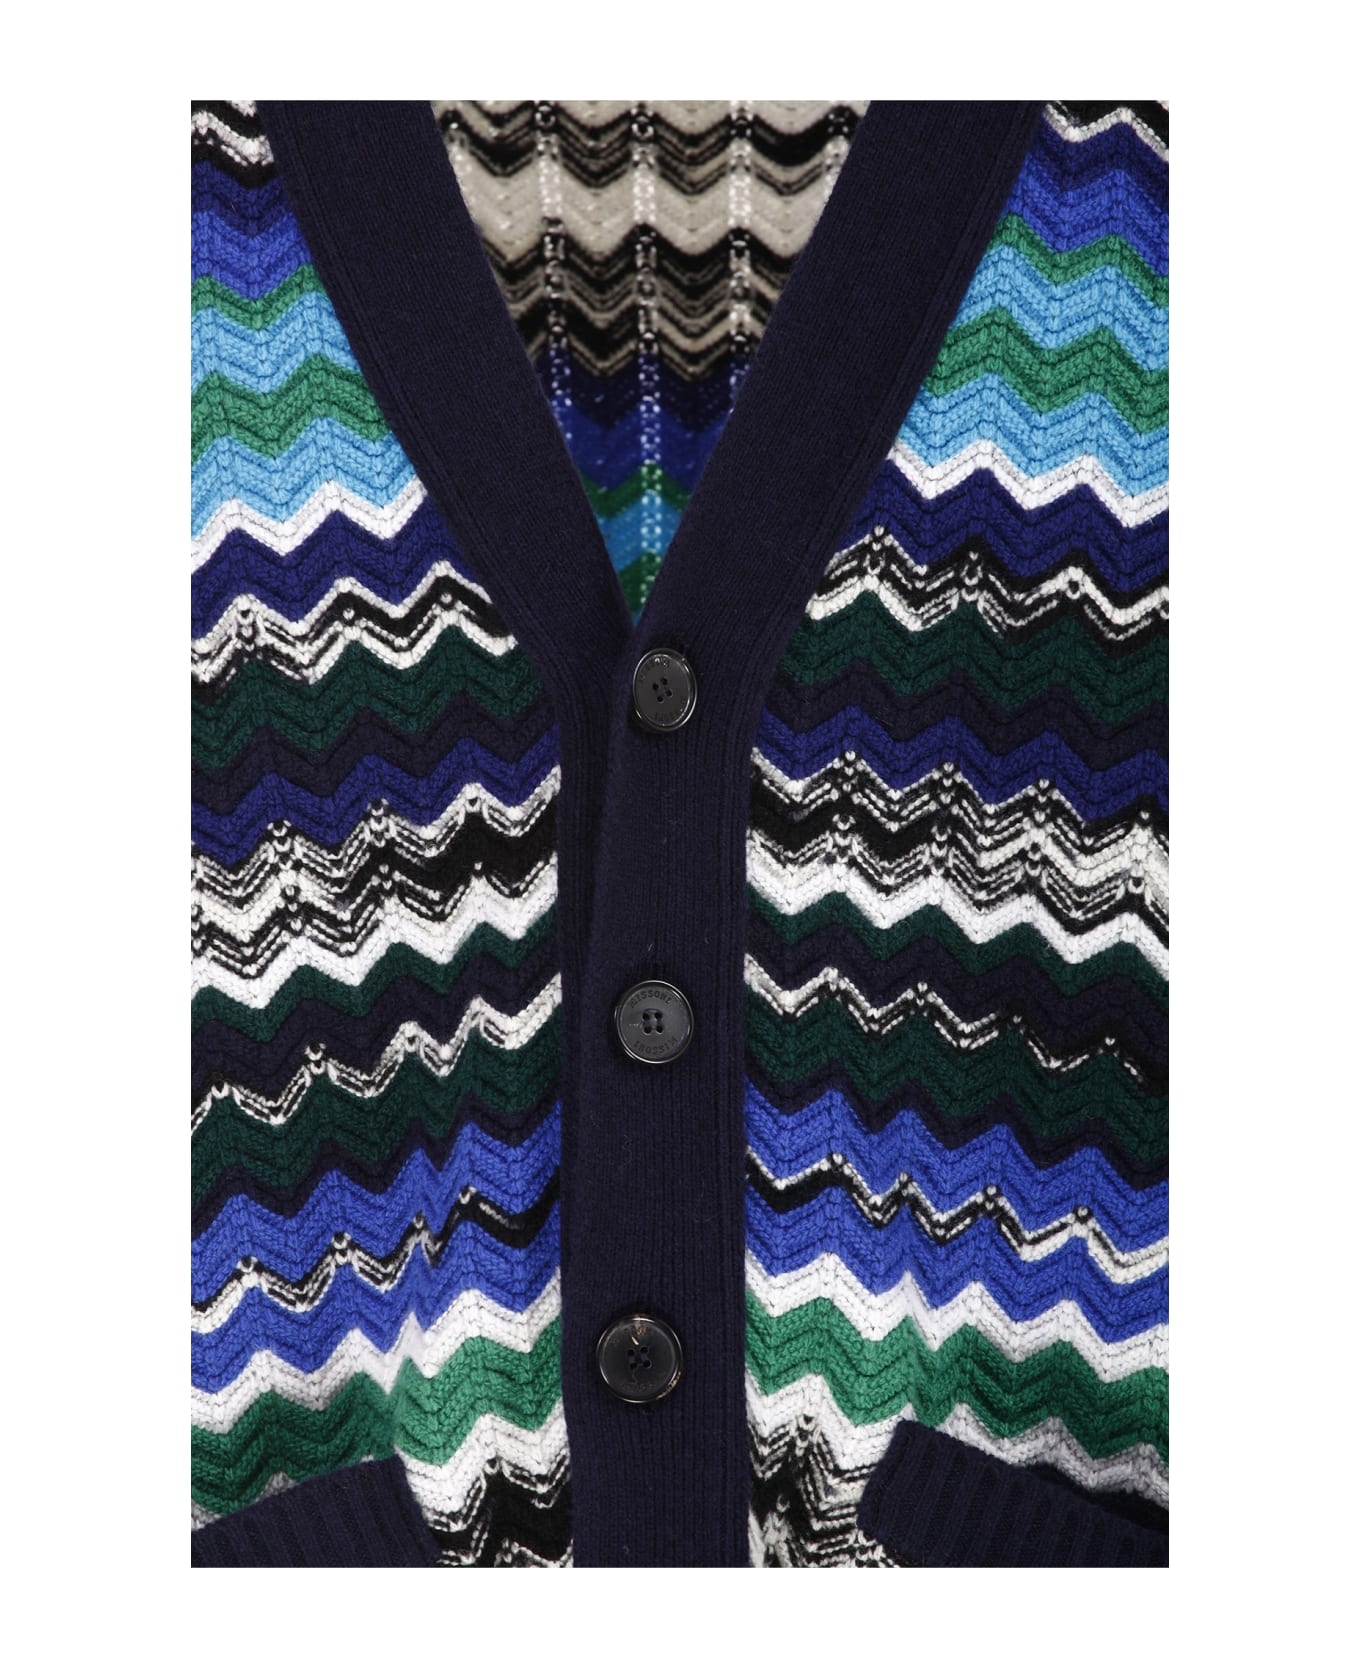 Missoni Knitted Cardigan - NAVY